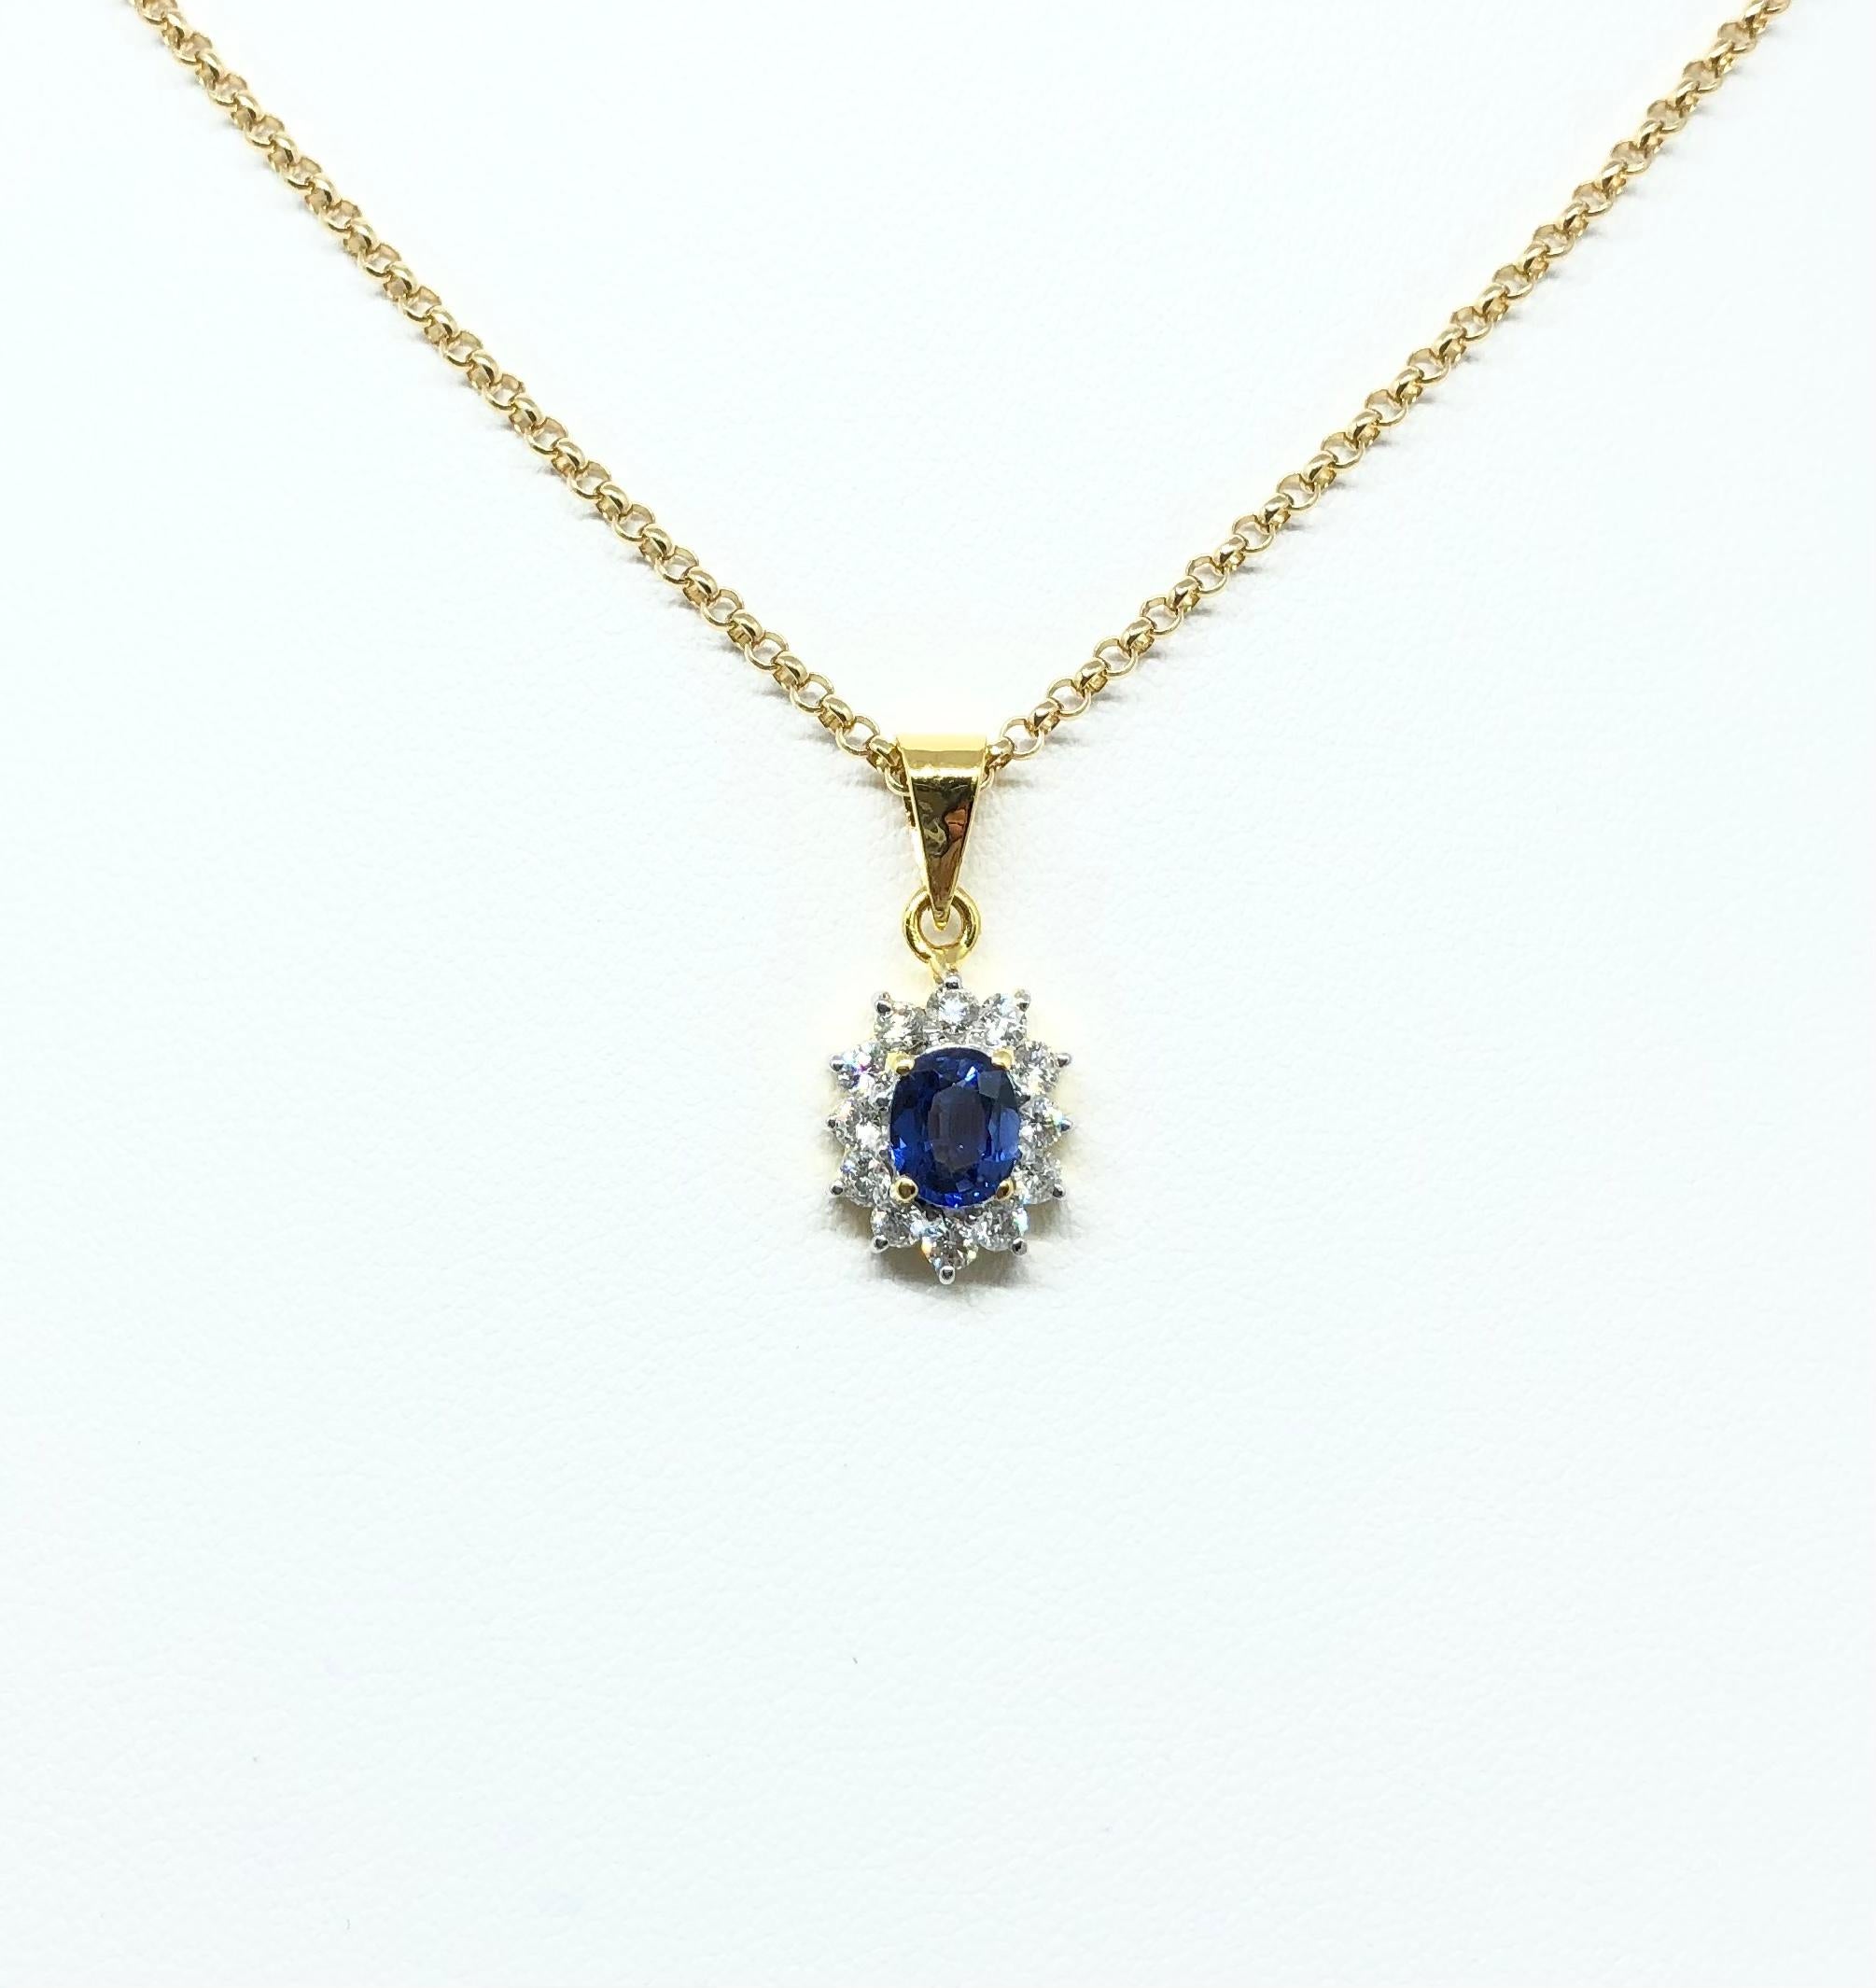 Blue Sapphire 0.66 carat with Diamond 0.30 carat Pendant set in 18 Karat Gold Settings
(chain not included)

Width: 1.0  cm 
Length: 2.0  cm
Total Weight: 2.13 grams

